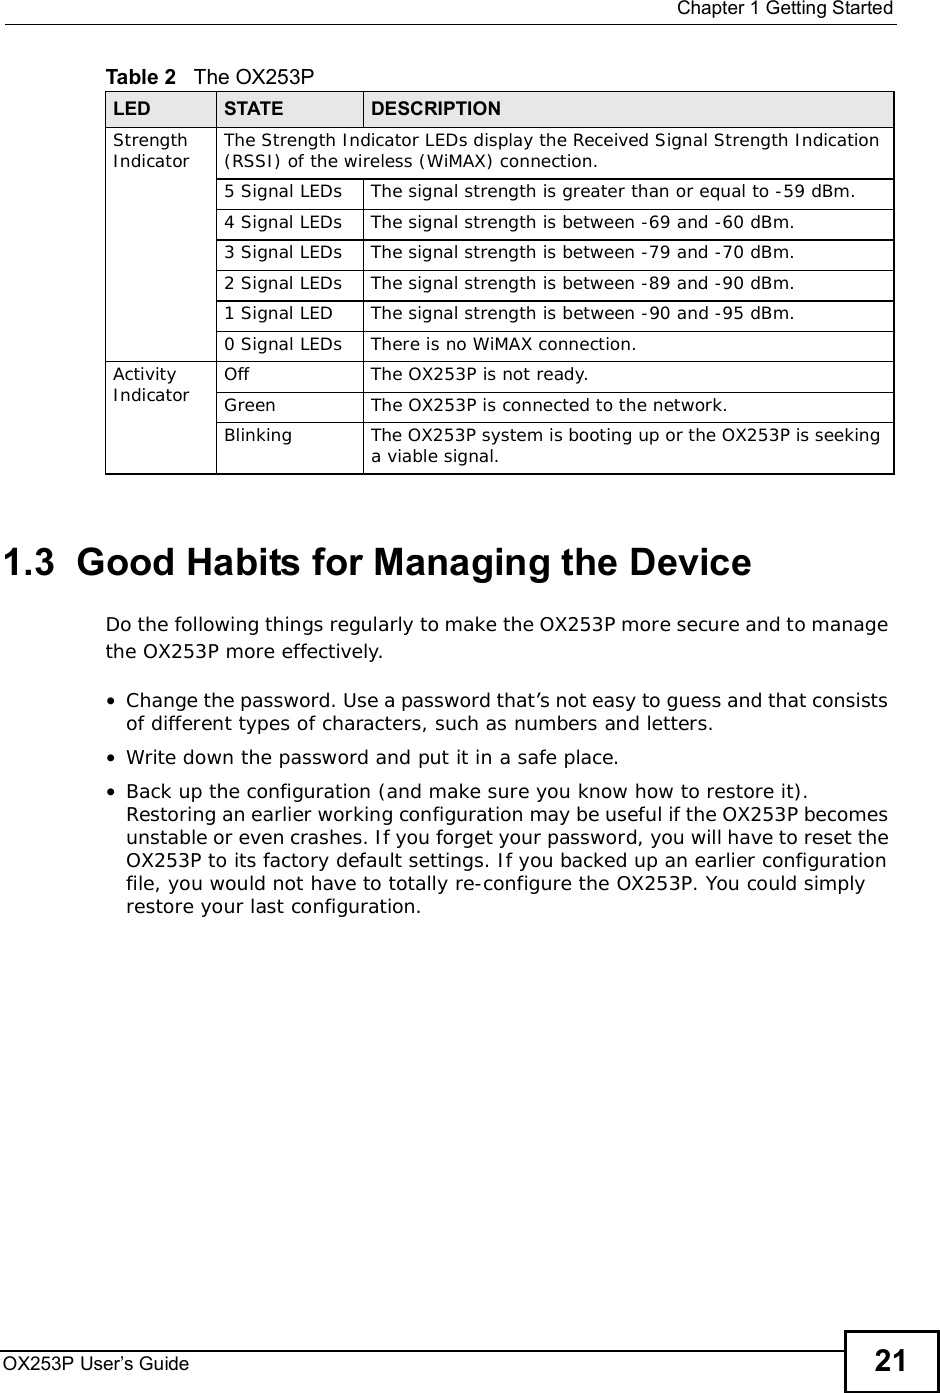  Chapter 1Getting StartedOX253P User’s Guide 211.3  Good Habits for Managing the DeviceDo the following things regularly to make the OX253P more secure and to manage the OX253P more effectively.•Change the password. Use a password that’s not easy to guess and that consists of different types of characters, such as numbers and letters.•Write down the password and put it in a safe place.•Back up the configuration (and make sure you know how to restore it). Restoring an earlier working configuration may be useful if the OX253P becomes unstable or even crashes. If you forget your password, you will have to reset the OX253P to its factory default settings. If you backed up an earlier configuration file, you would not have to totally re-configure the OX253P. You could simply restore your last configuration.StrengthIndicator The Strength Indicator LEDs display the Received Signal Strength Indication (RSSI) of the wireless (WiMAX) connection. 5 Signal LEDsThe signal strength is greater than or equal to -59 dBm.4 Signal LEDsThe signal strength is between -69 and -60 dBm.3 Signal LEDsThe signal strength is between -79 and -70 dBm.2 Signal LEDsThe signal strength is between -89 and -90 dBm.1 Signal LEDThe signal strength is between -90 and -95 dBm.0 Signal LEDsThere is no WiMAX connection.Activity Indicator OffThe OX253P is not ready.GreenThe OX253P is connected to the network.BlinkingThe OX253P system is booting up or the OX253P is seeking a viable signal.Table 2   The OX253PLED STATE DESCRIPTION